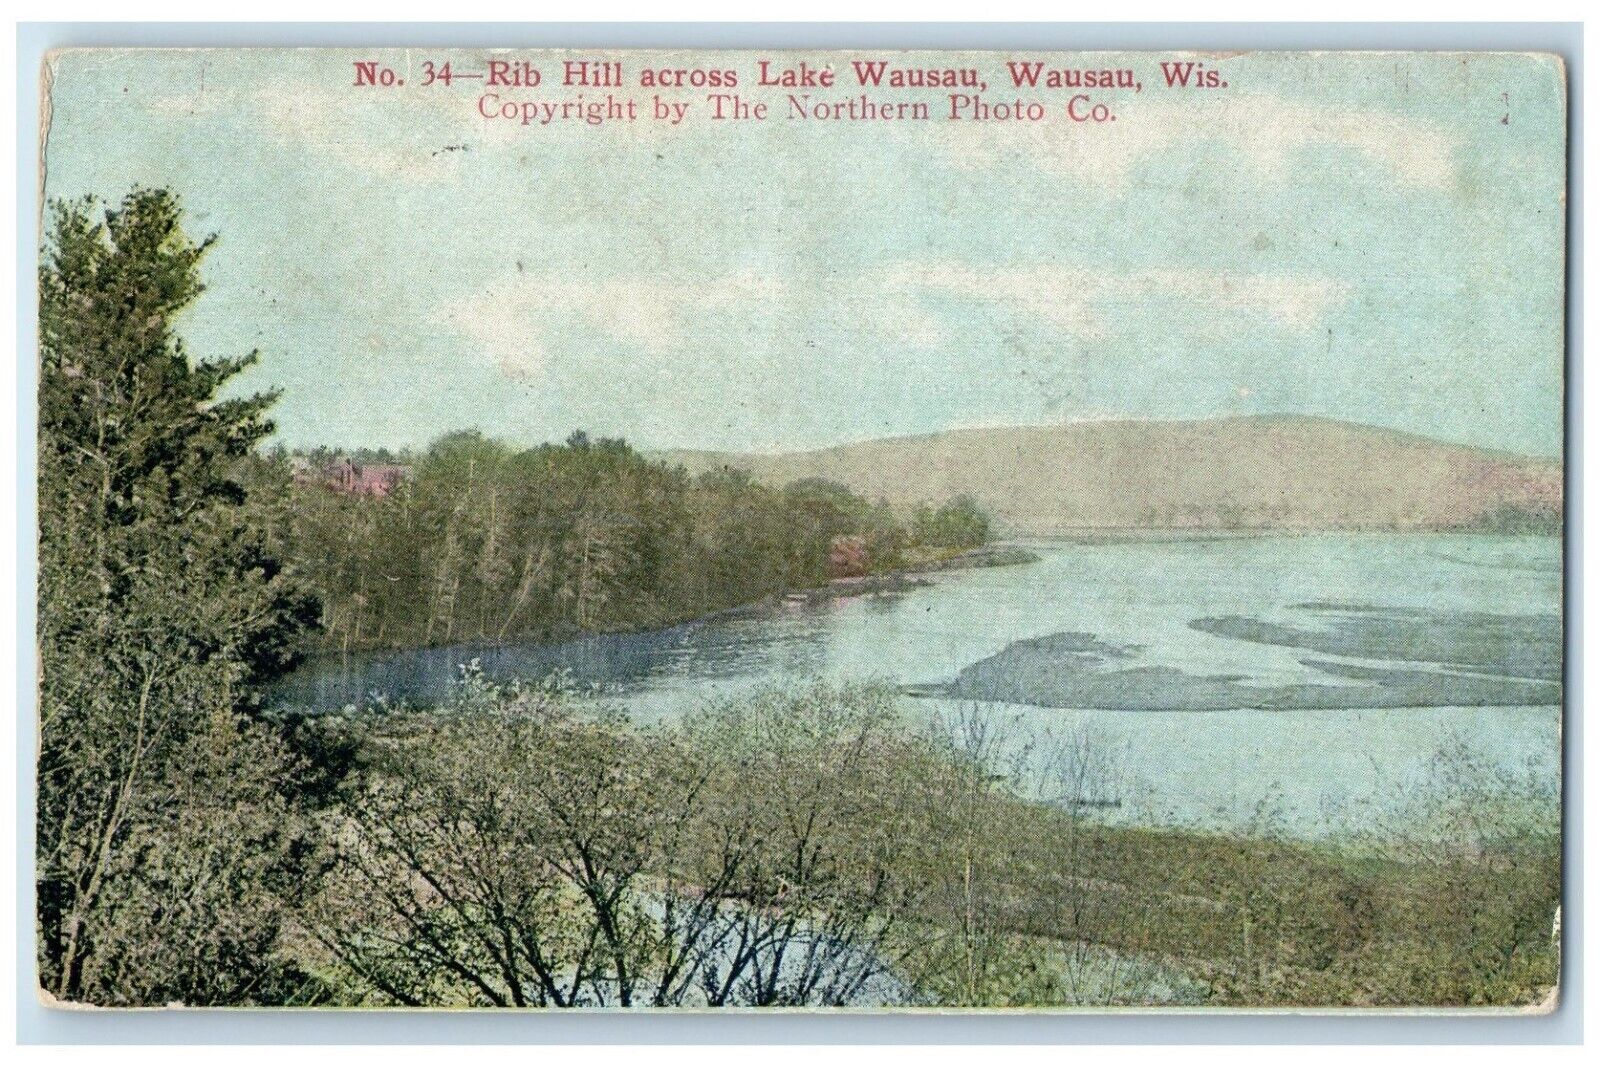 1914 Scenic View Rib Hill Across Lake Wausau Wisconsin Vintage Antique Postcard